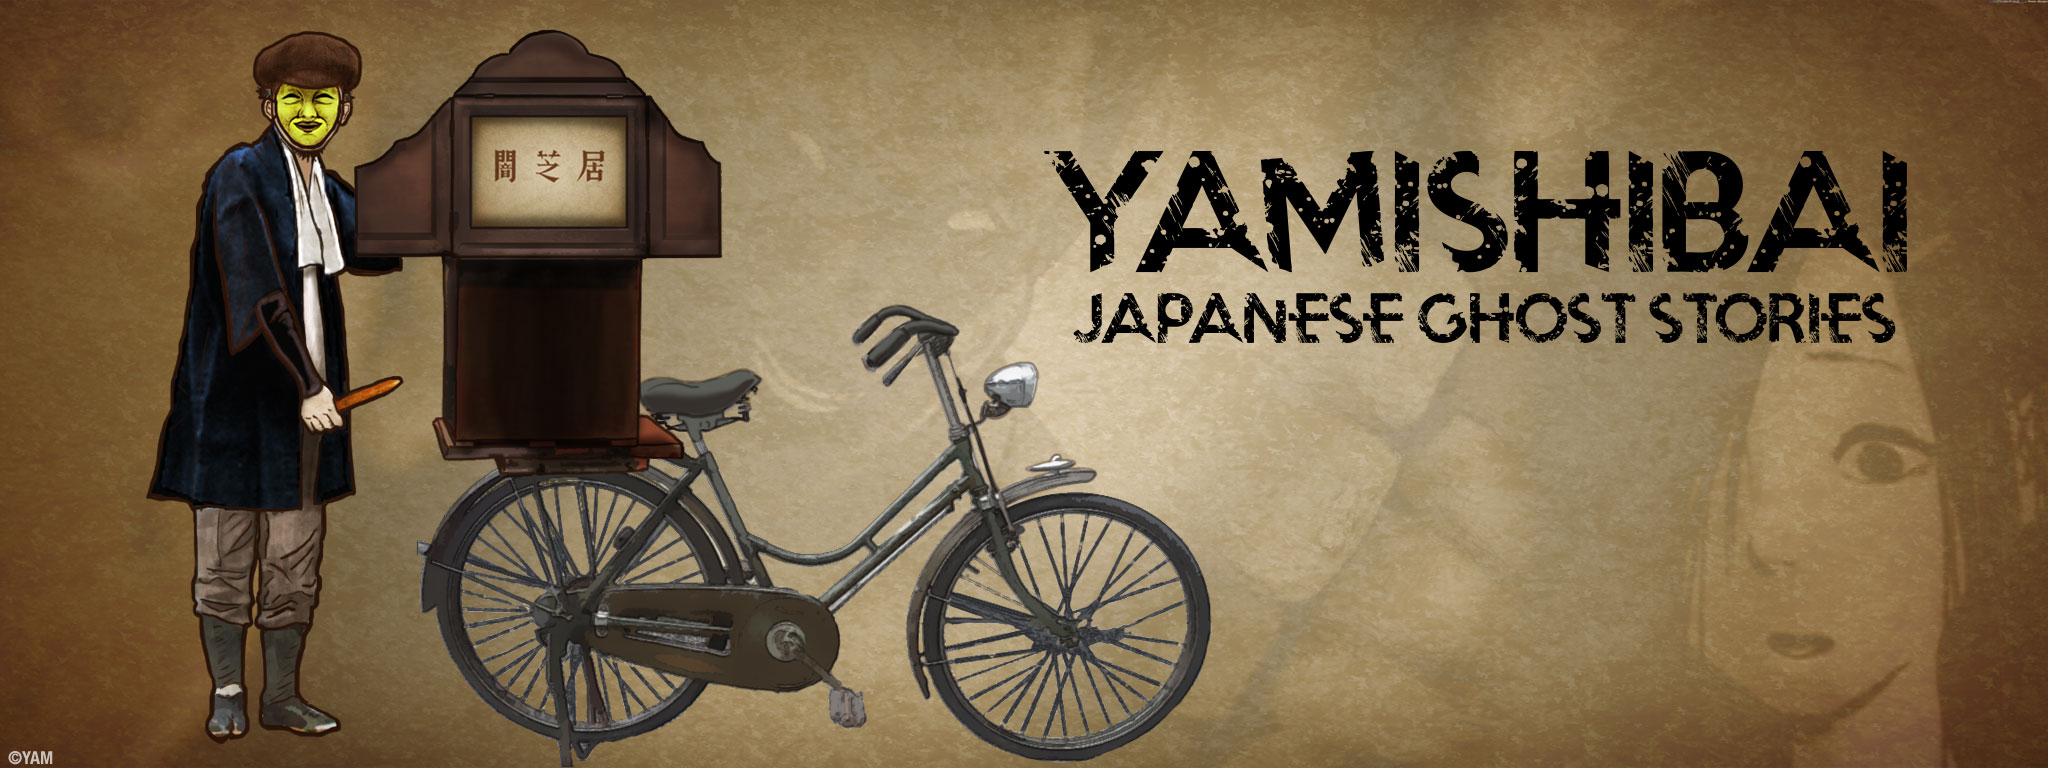 Title Art for Yamishibai: Japanese Ghost Stories